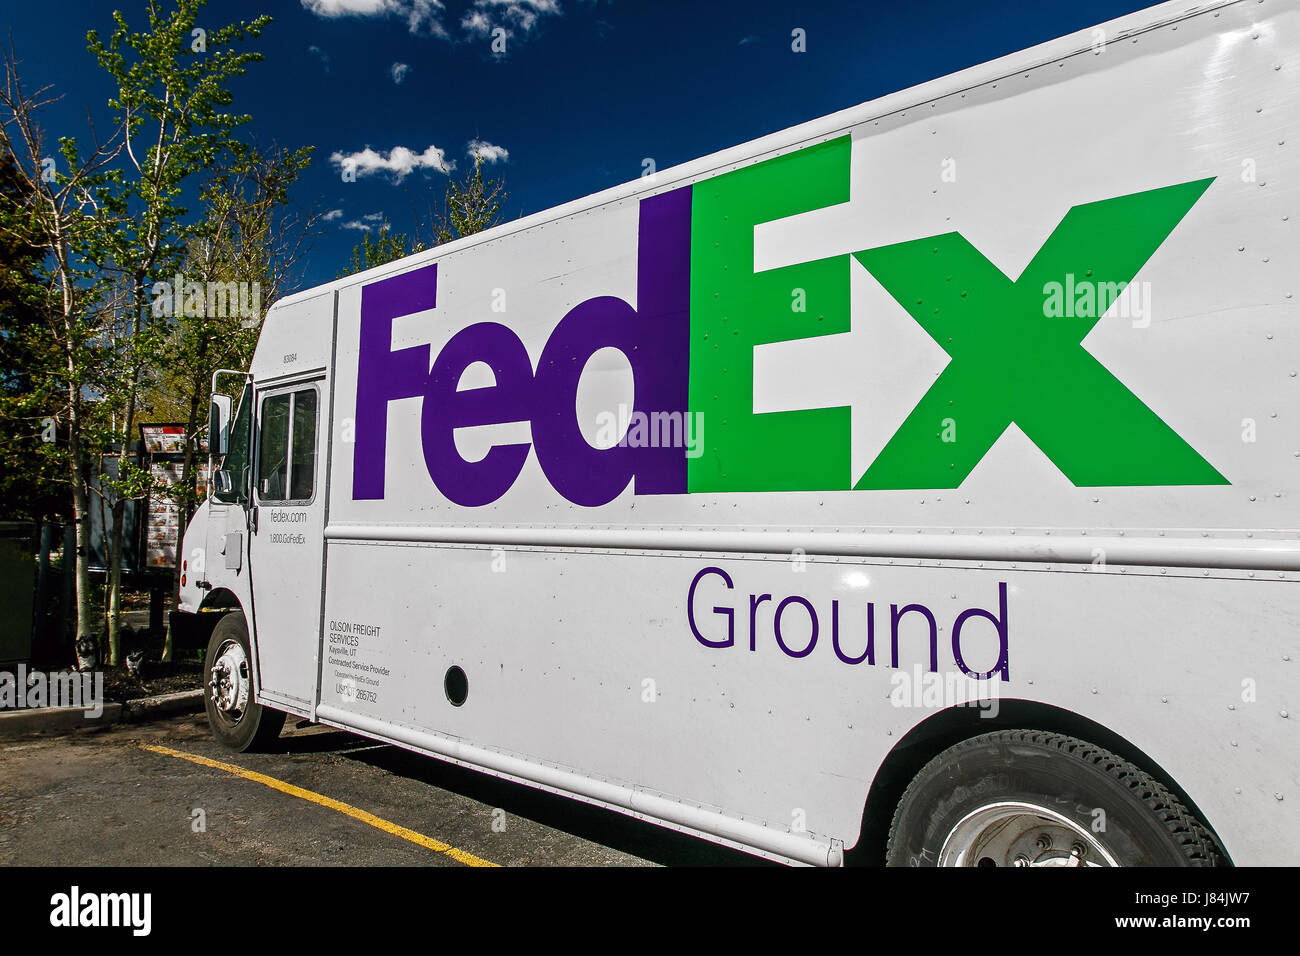 Park City, UT, May 12, 2017: Bright sun shiines on a side of a parked FedEx Ground white truck. Stock Photo